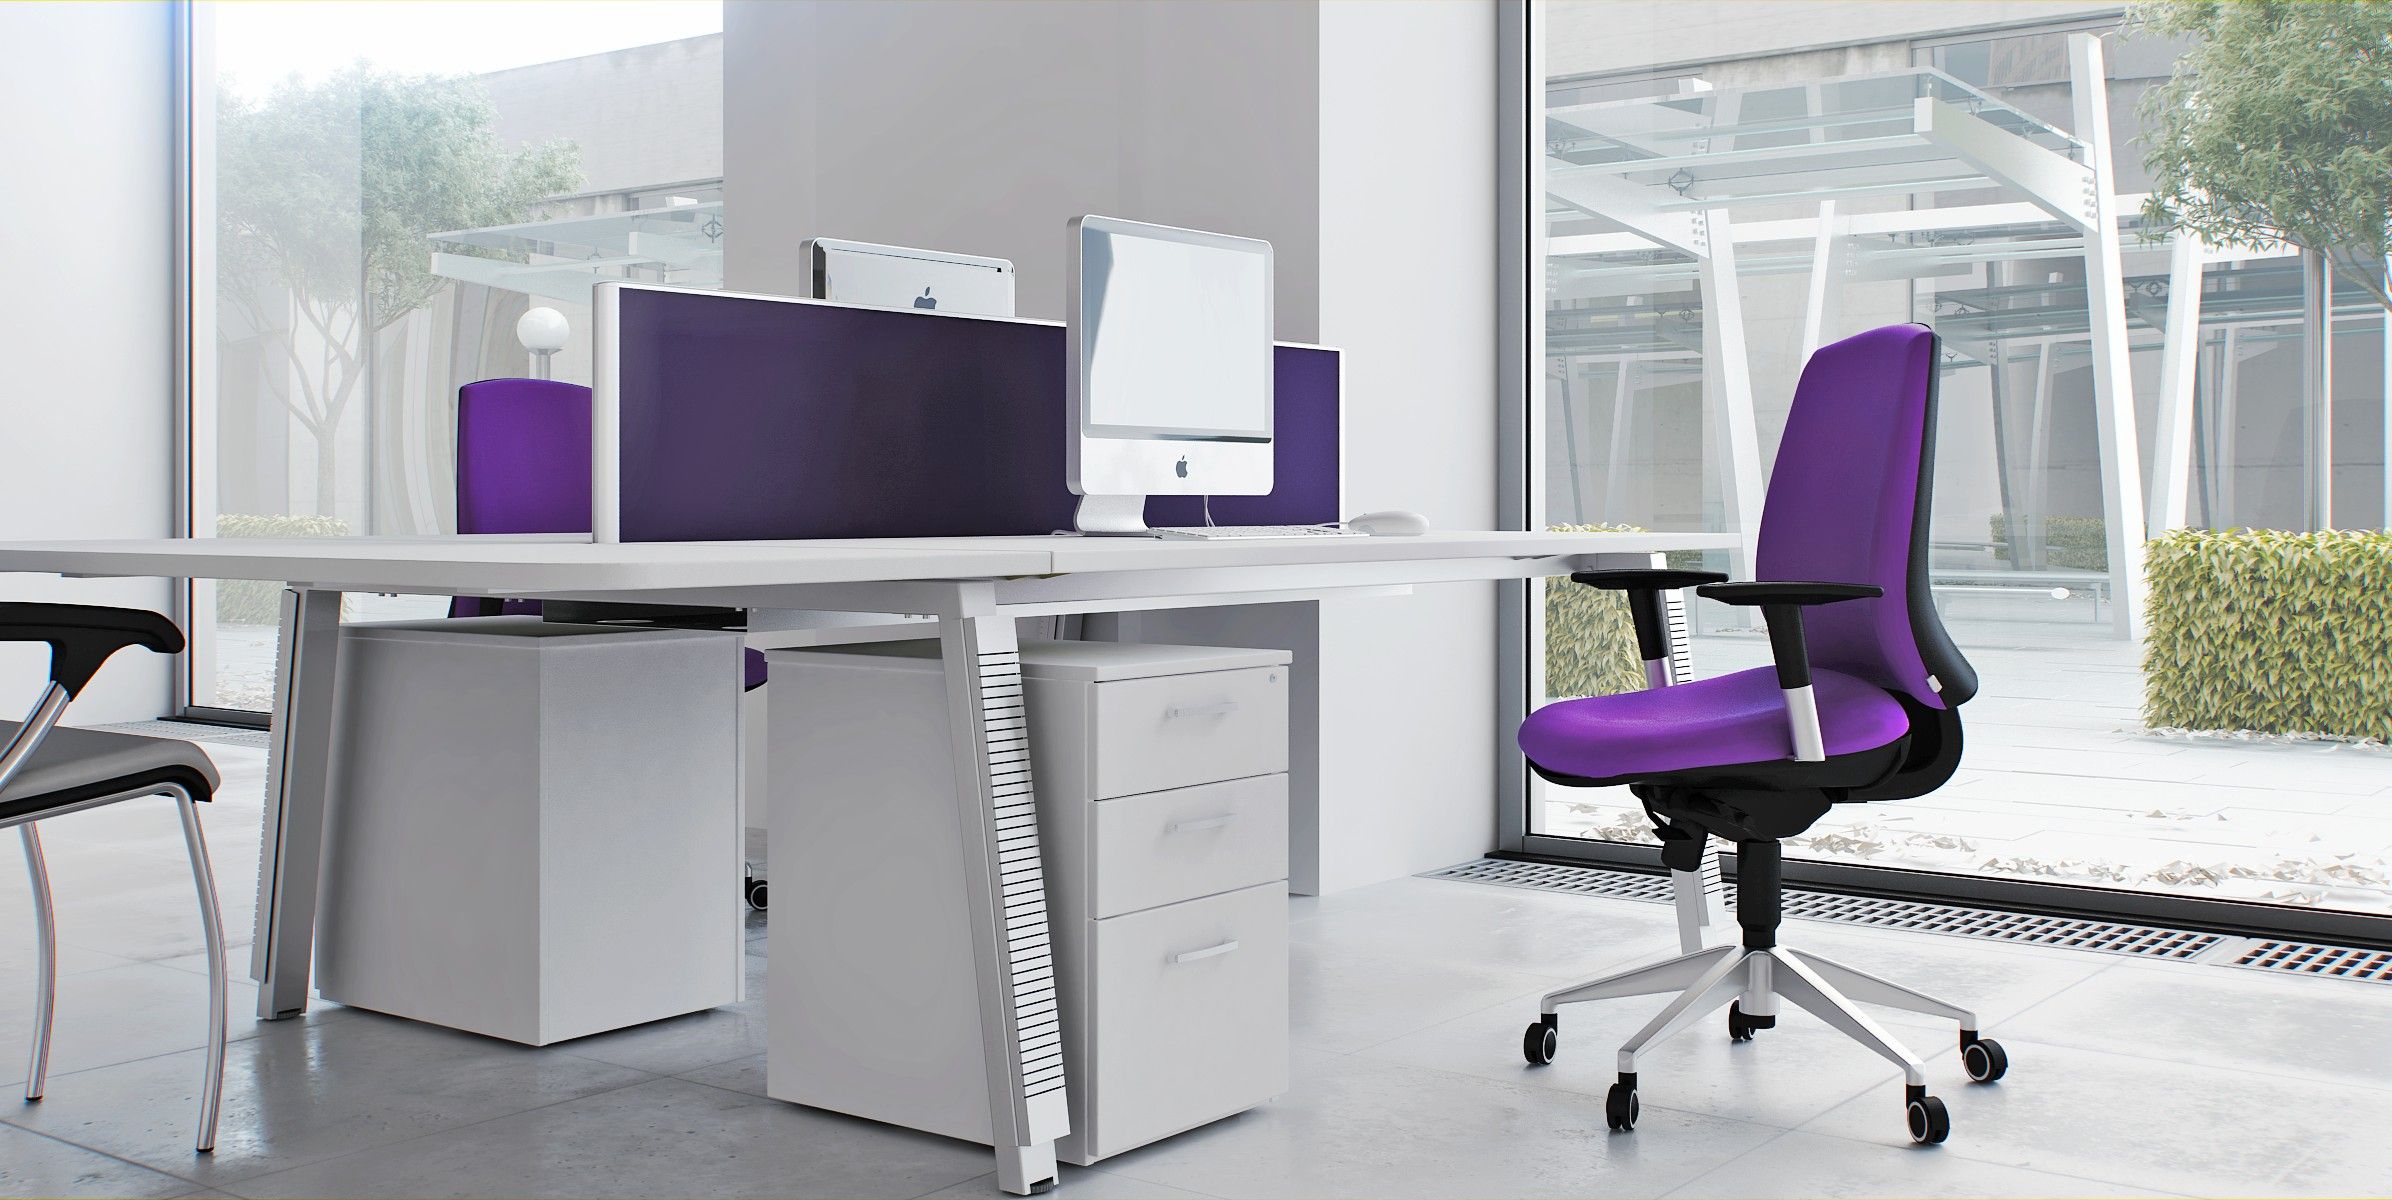 Captivating Modern Office Chair With Soft Purple Fabric Mixed With ...